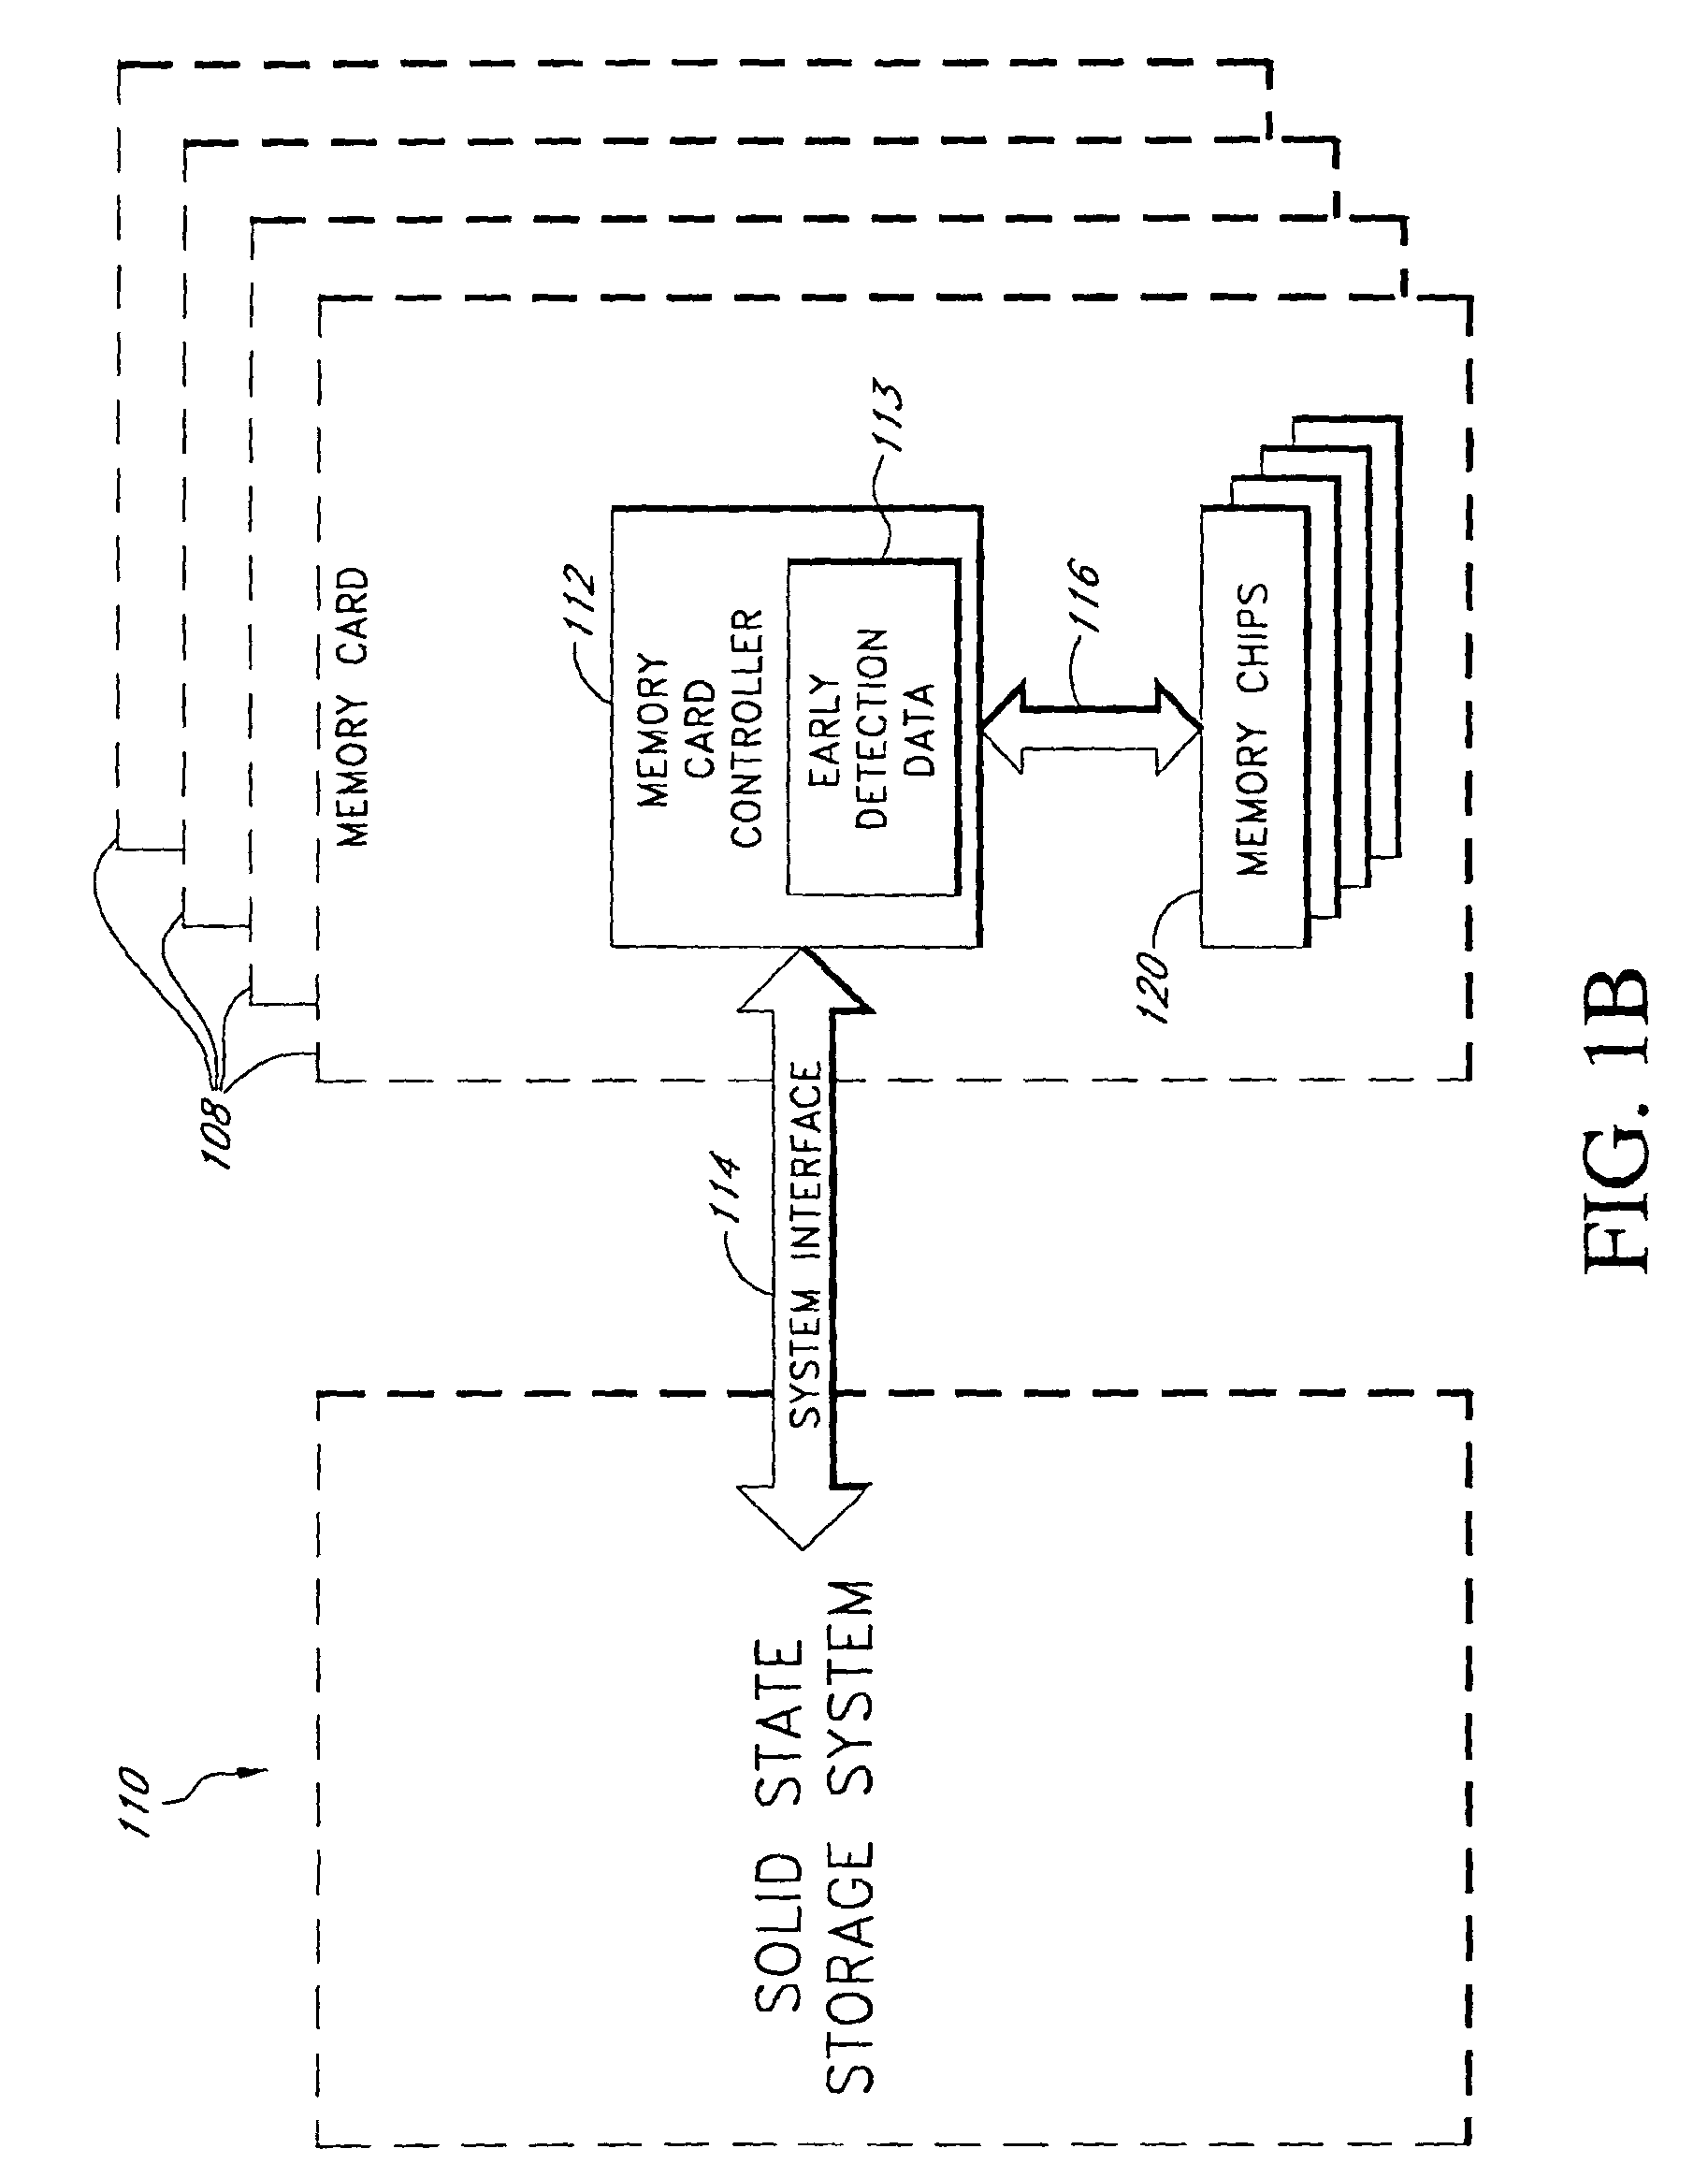 System and method for early detection of failure of a solid-state data storage system